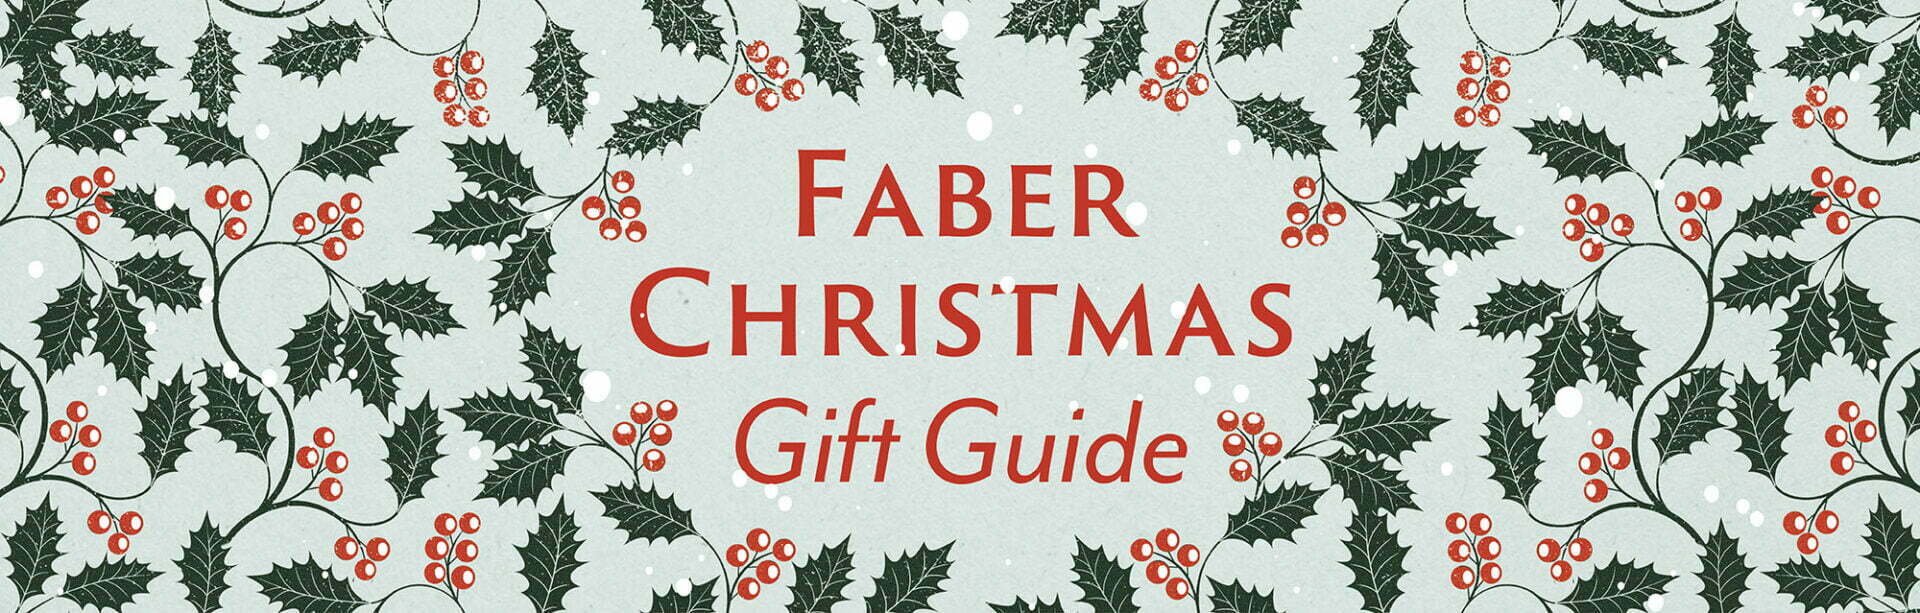 https://faber.wp.dev.diffusion.digital/wp-content/uploads/2021/11/Faber-Christmas-Gift-Guide-1-1920x613.jpg